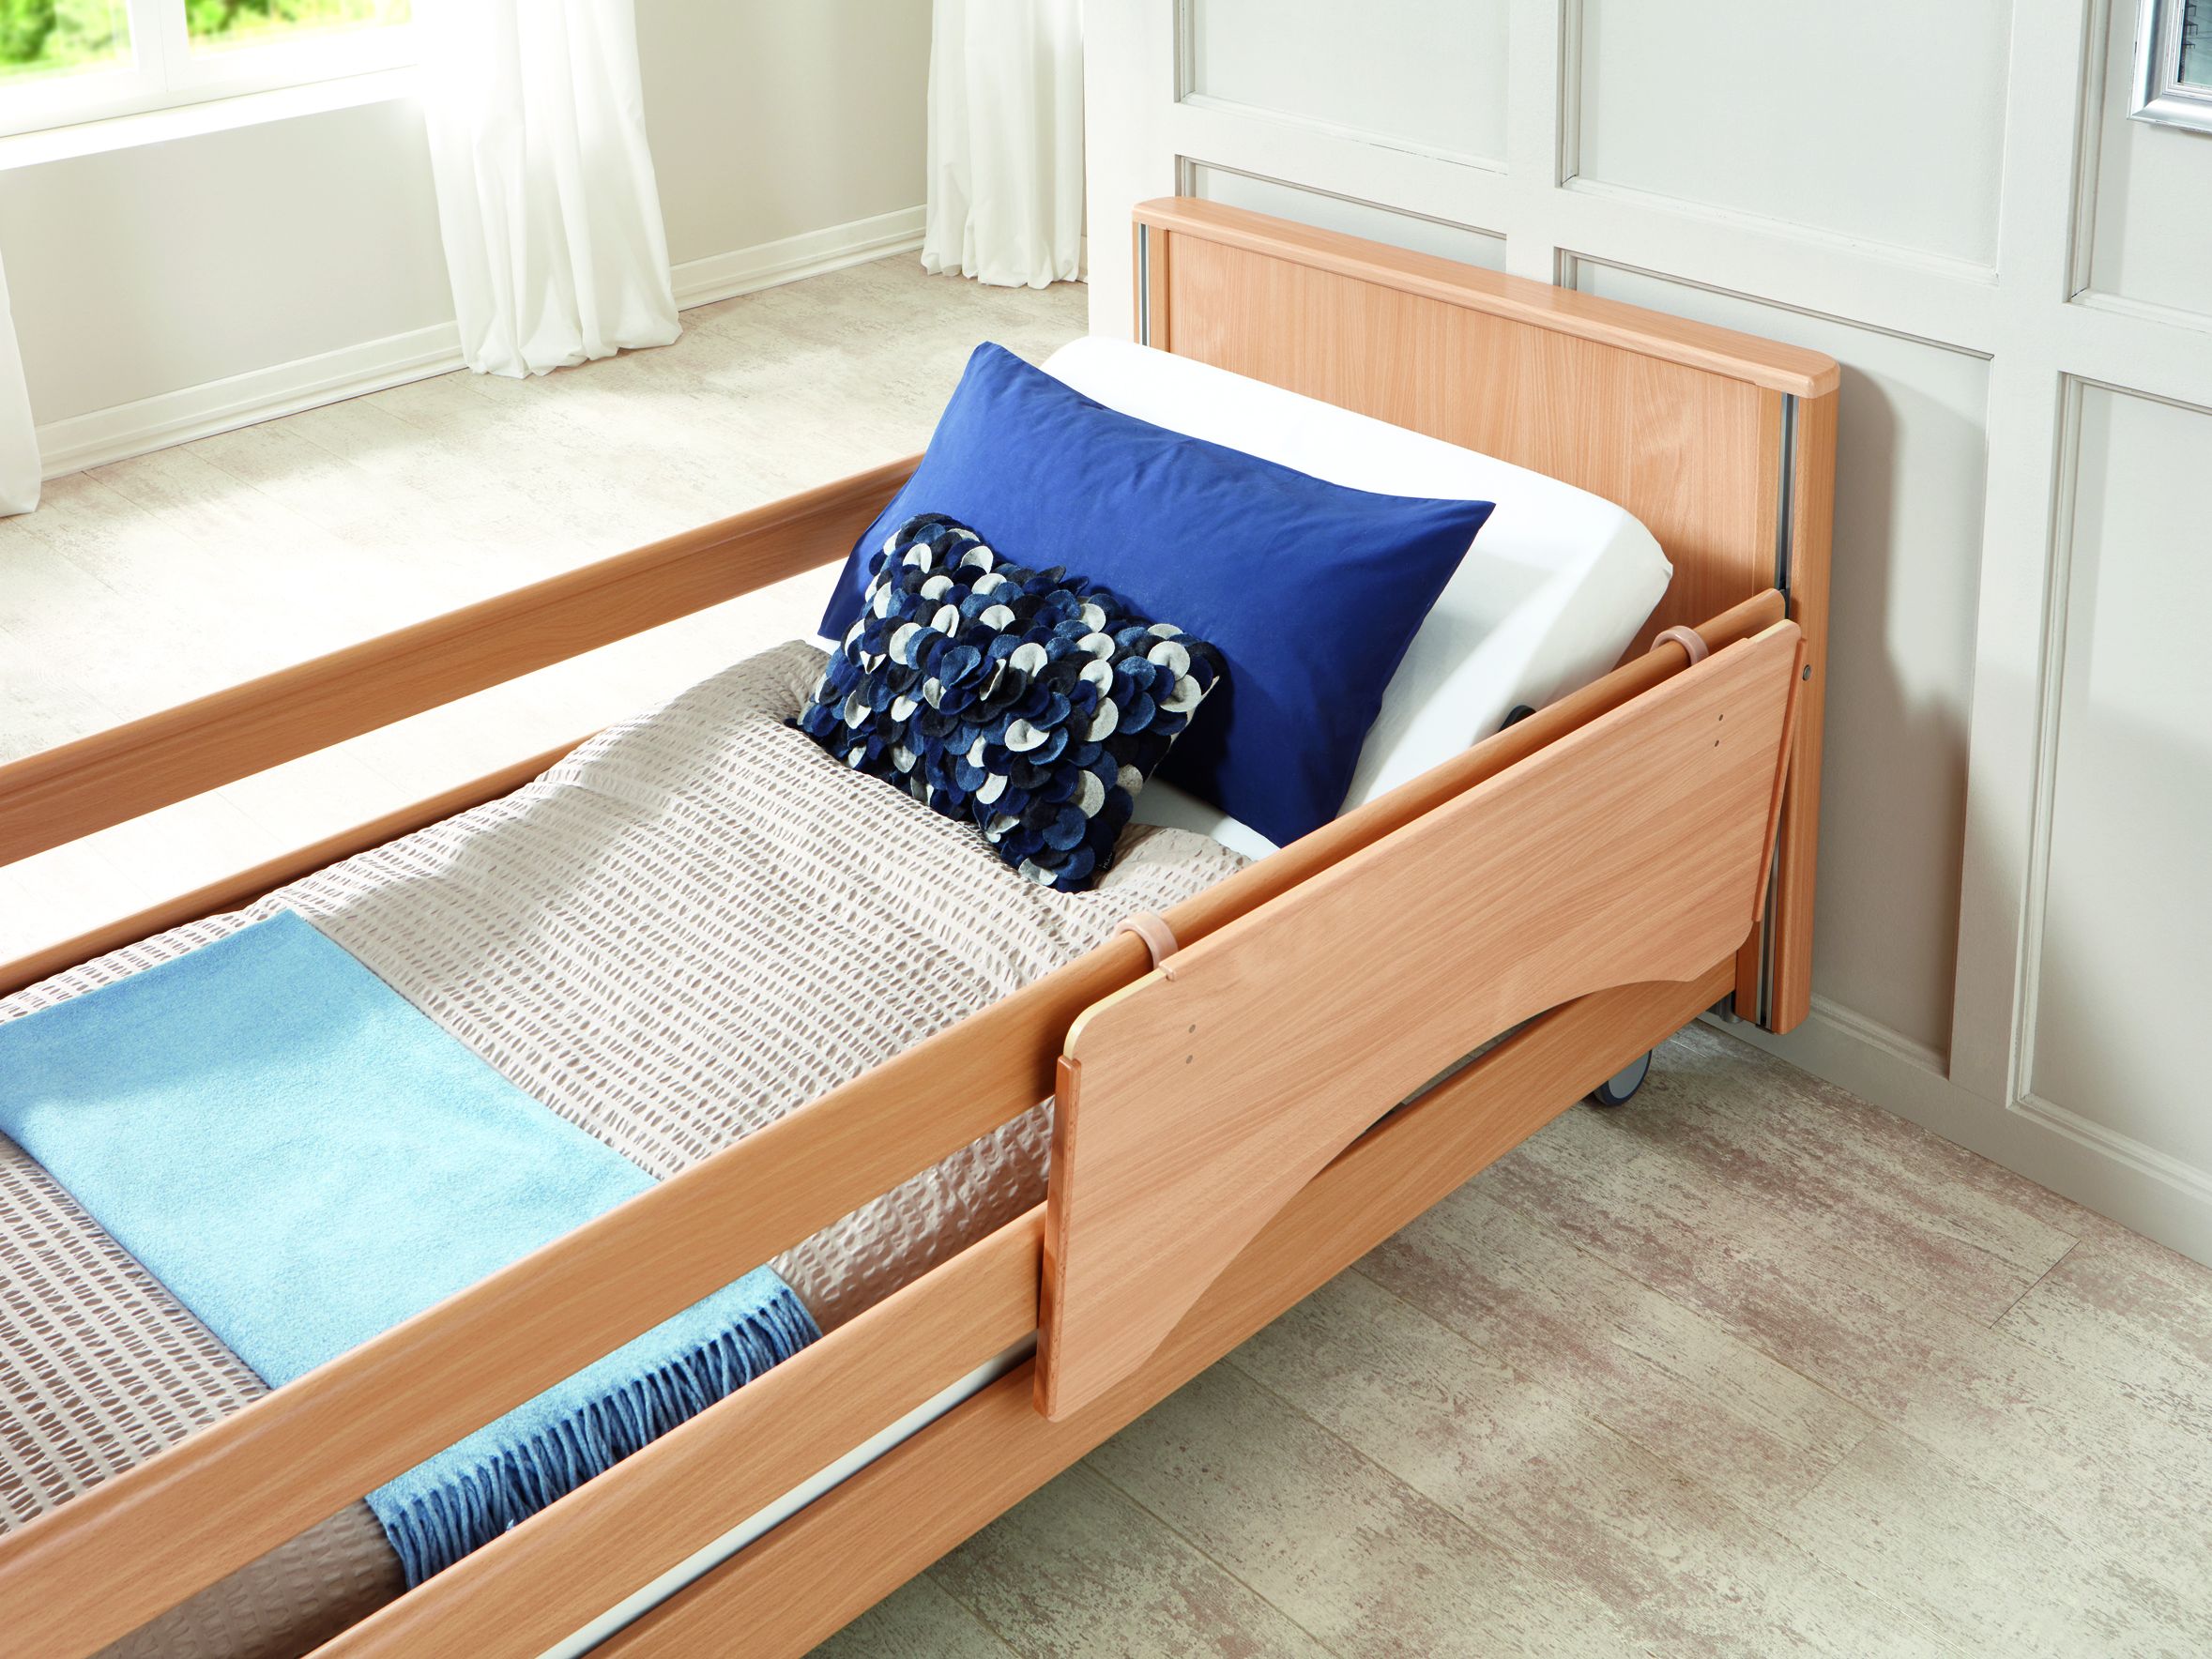 Optional tray for the Inovia care bed